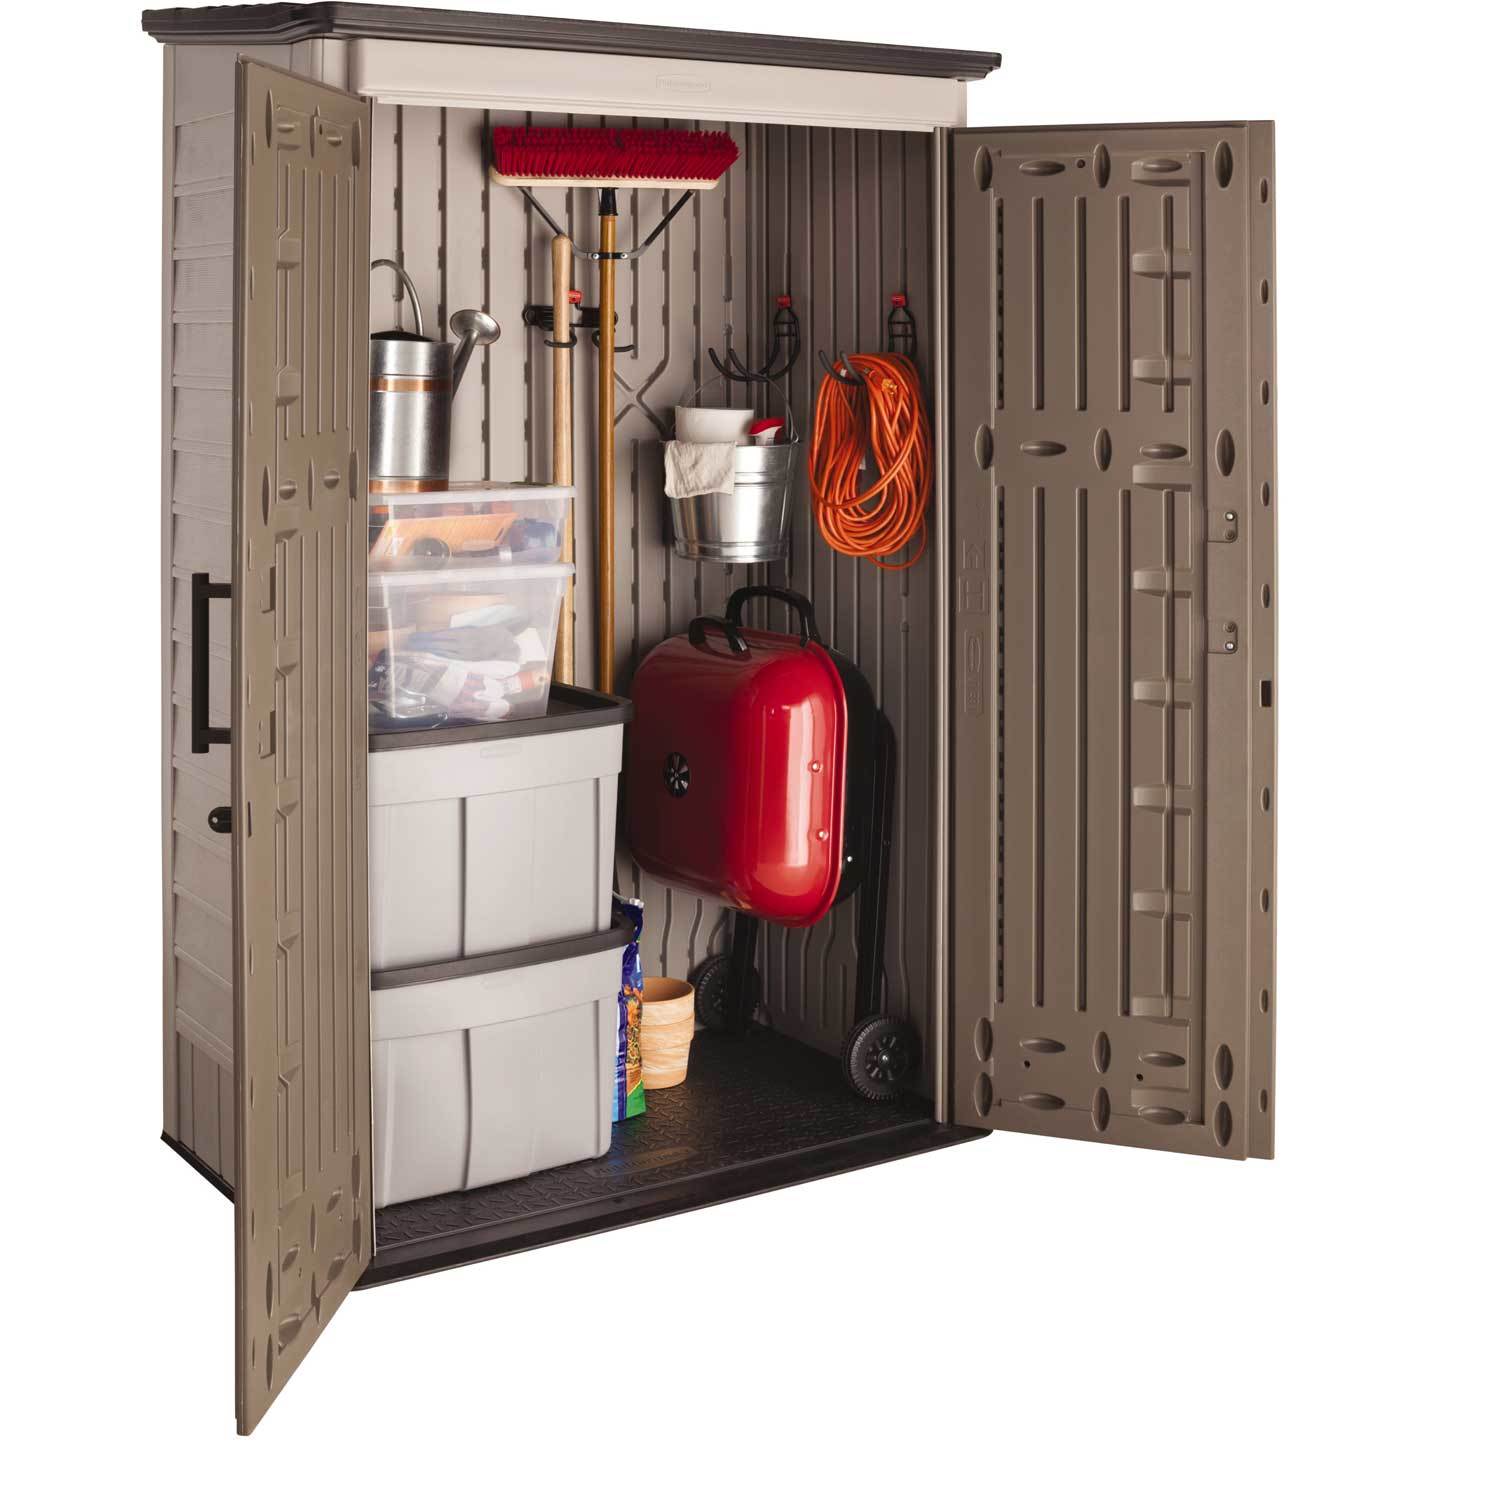 Rubbermaid Large Vertical 52 Cu.ft. Outdoor Storage Building Shed - image 3 of 8